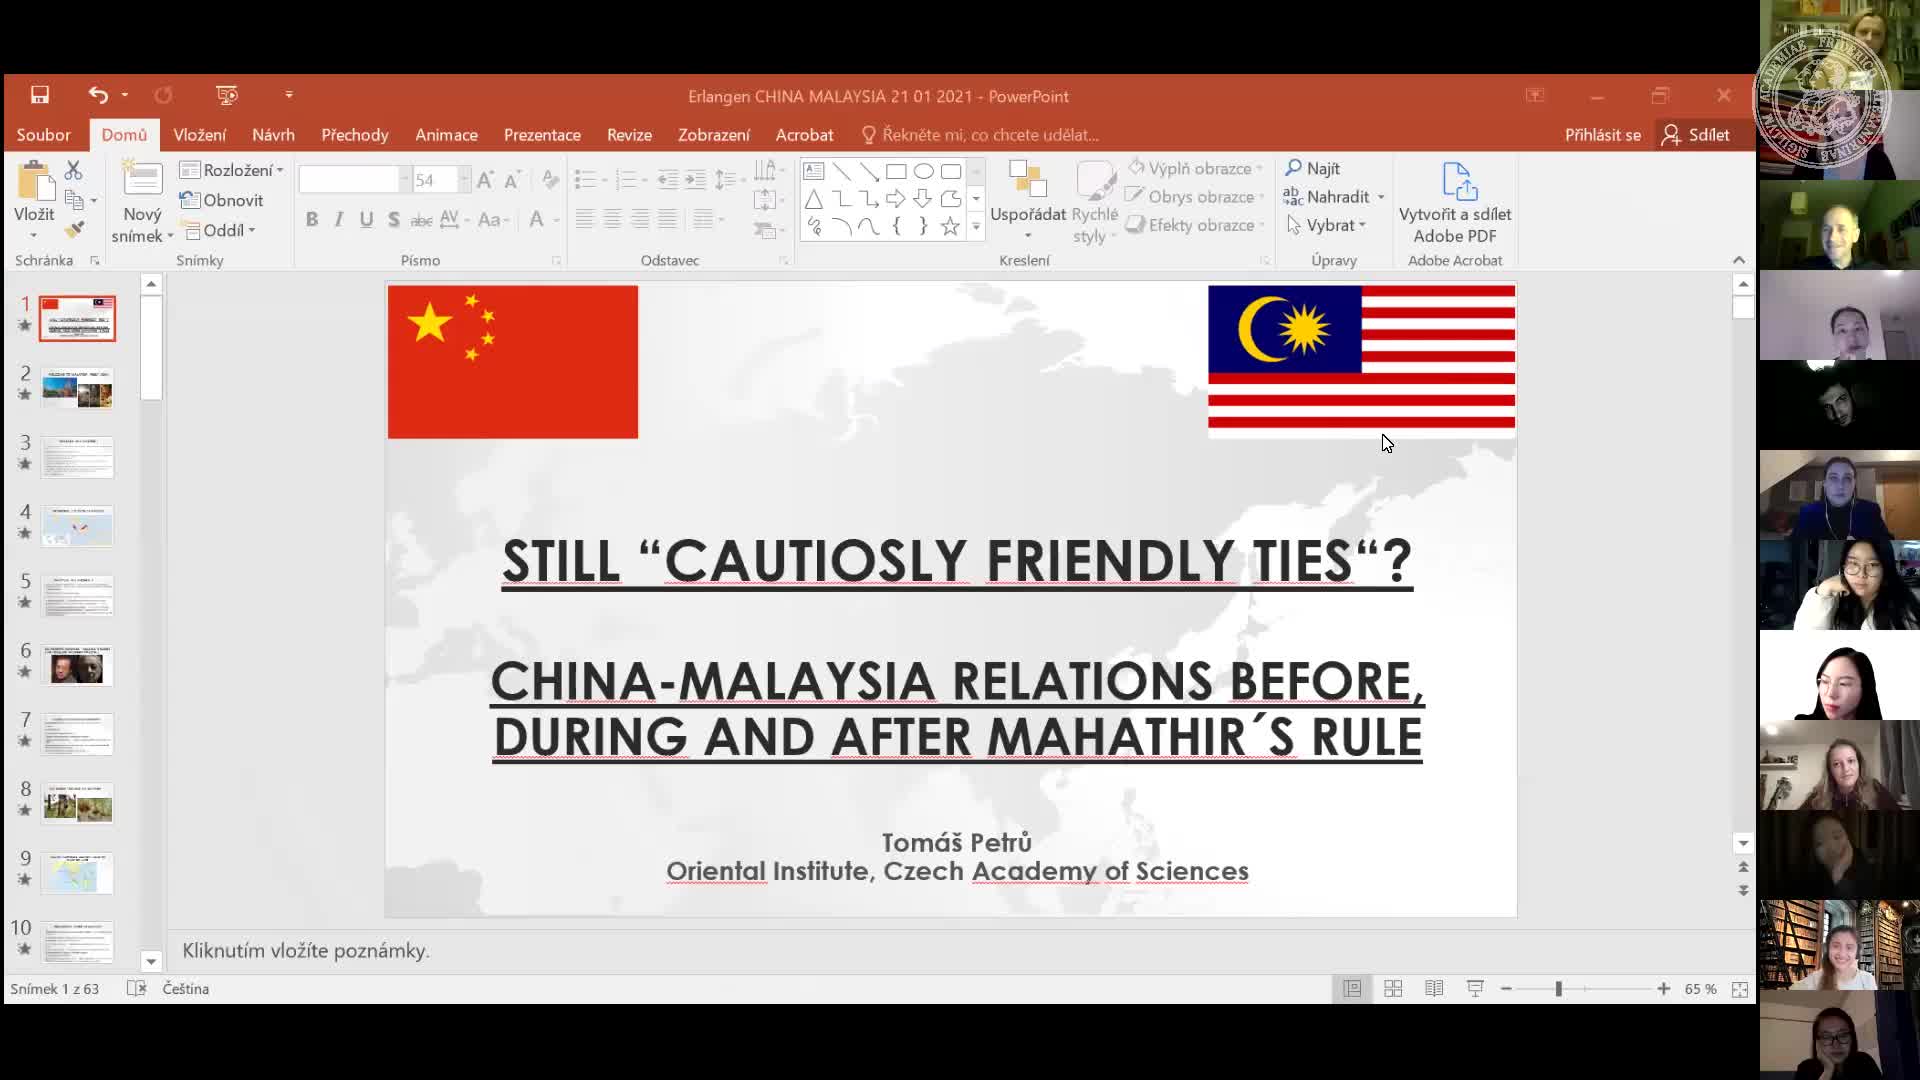 Tomas Petru (Czech Academy of Sciences): "Still Cautiously Friendly Ties? China-Malaysia Relations Before, During, and After Mahathirs Second Rule (2018-February 2020)" preview image